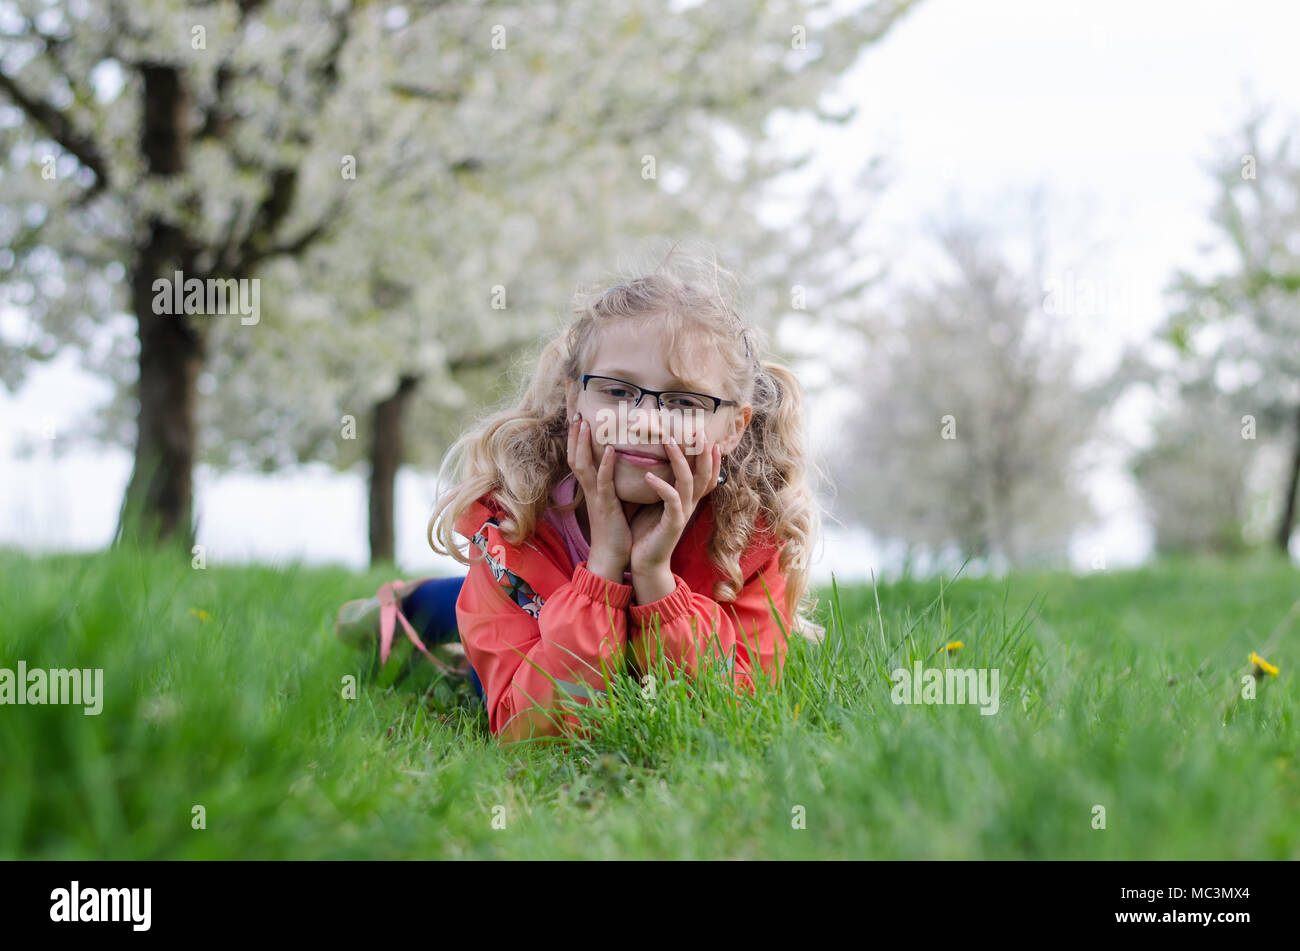 adorable blond girl lying in green grass under trees with blossoming white flowers in spring season Stock Photo